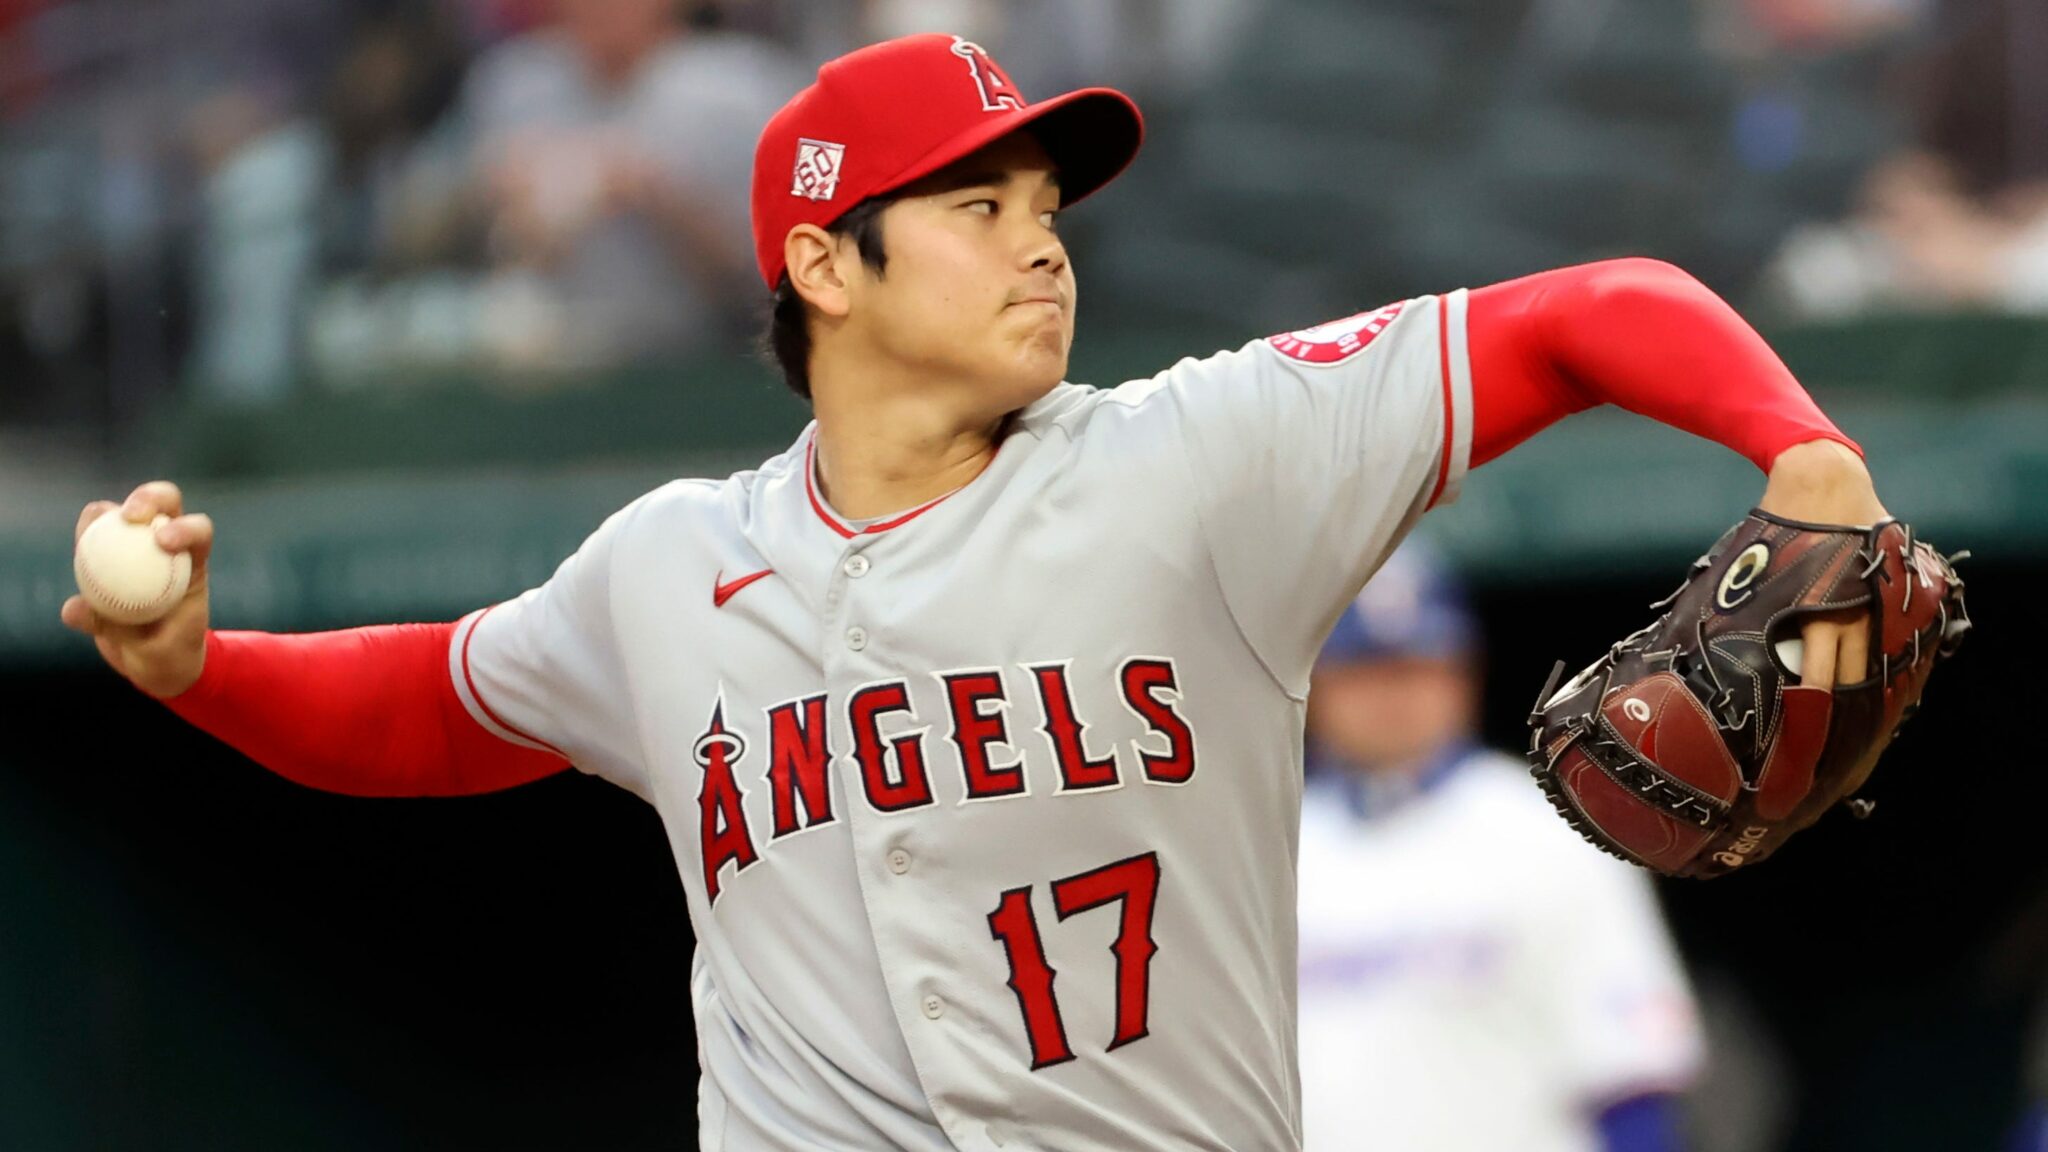 Angels Shohei Ohtani Becomes 1st All Star Picked As Pitcher And Hitter